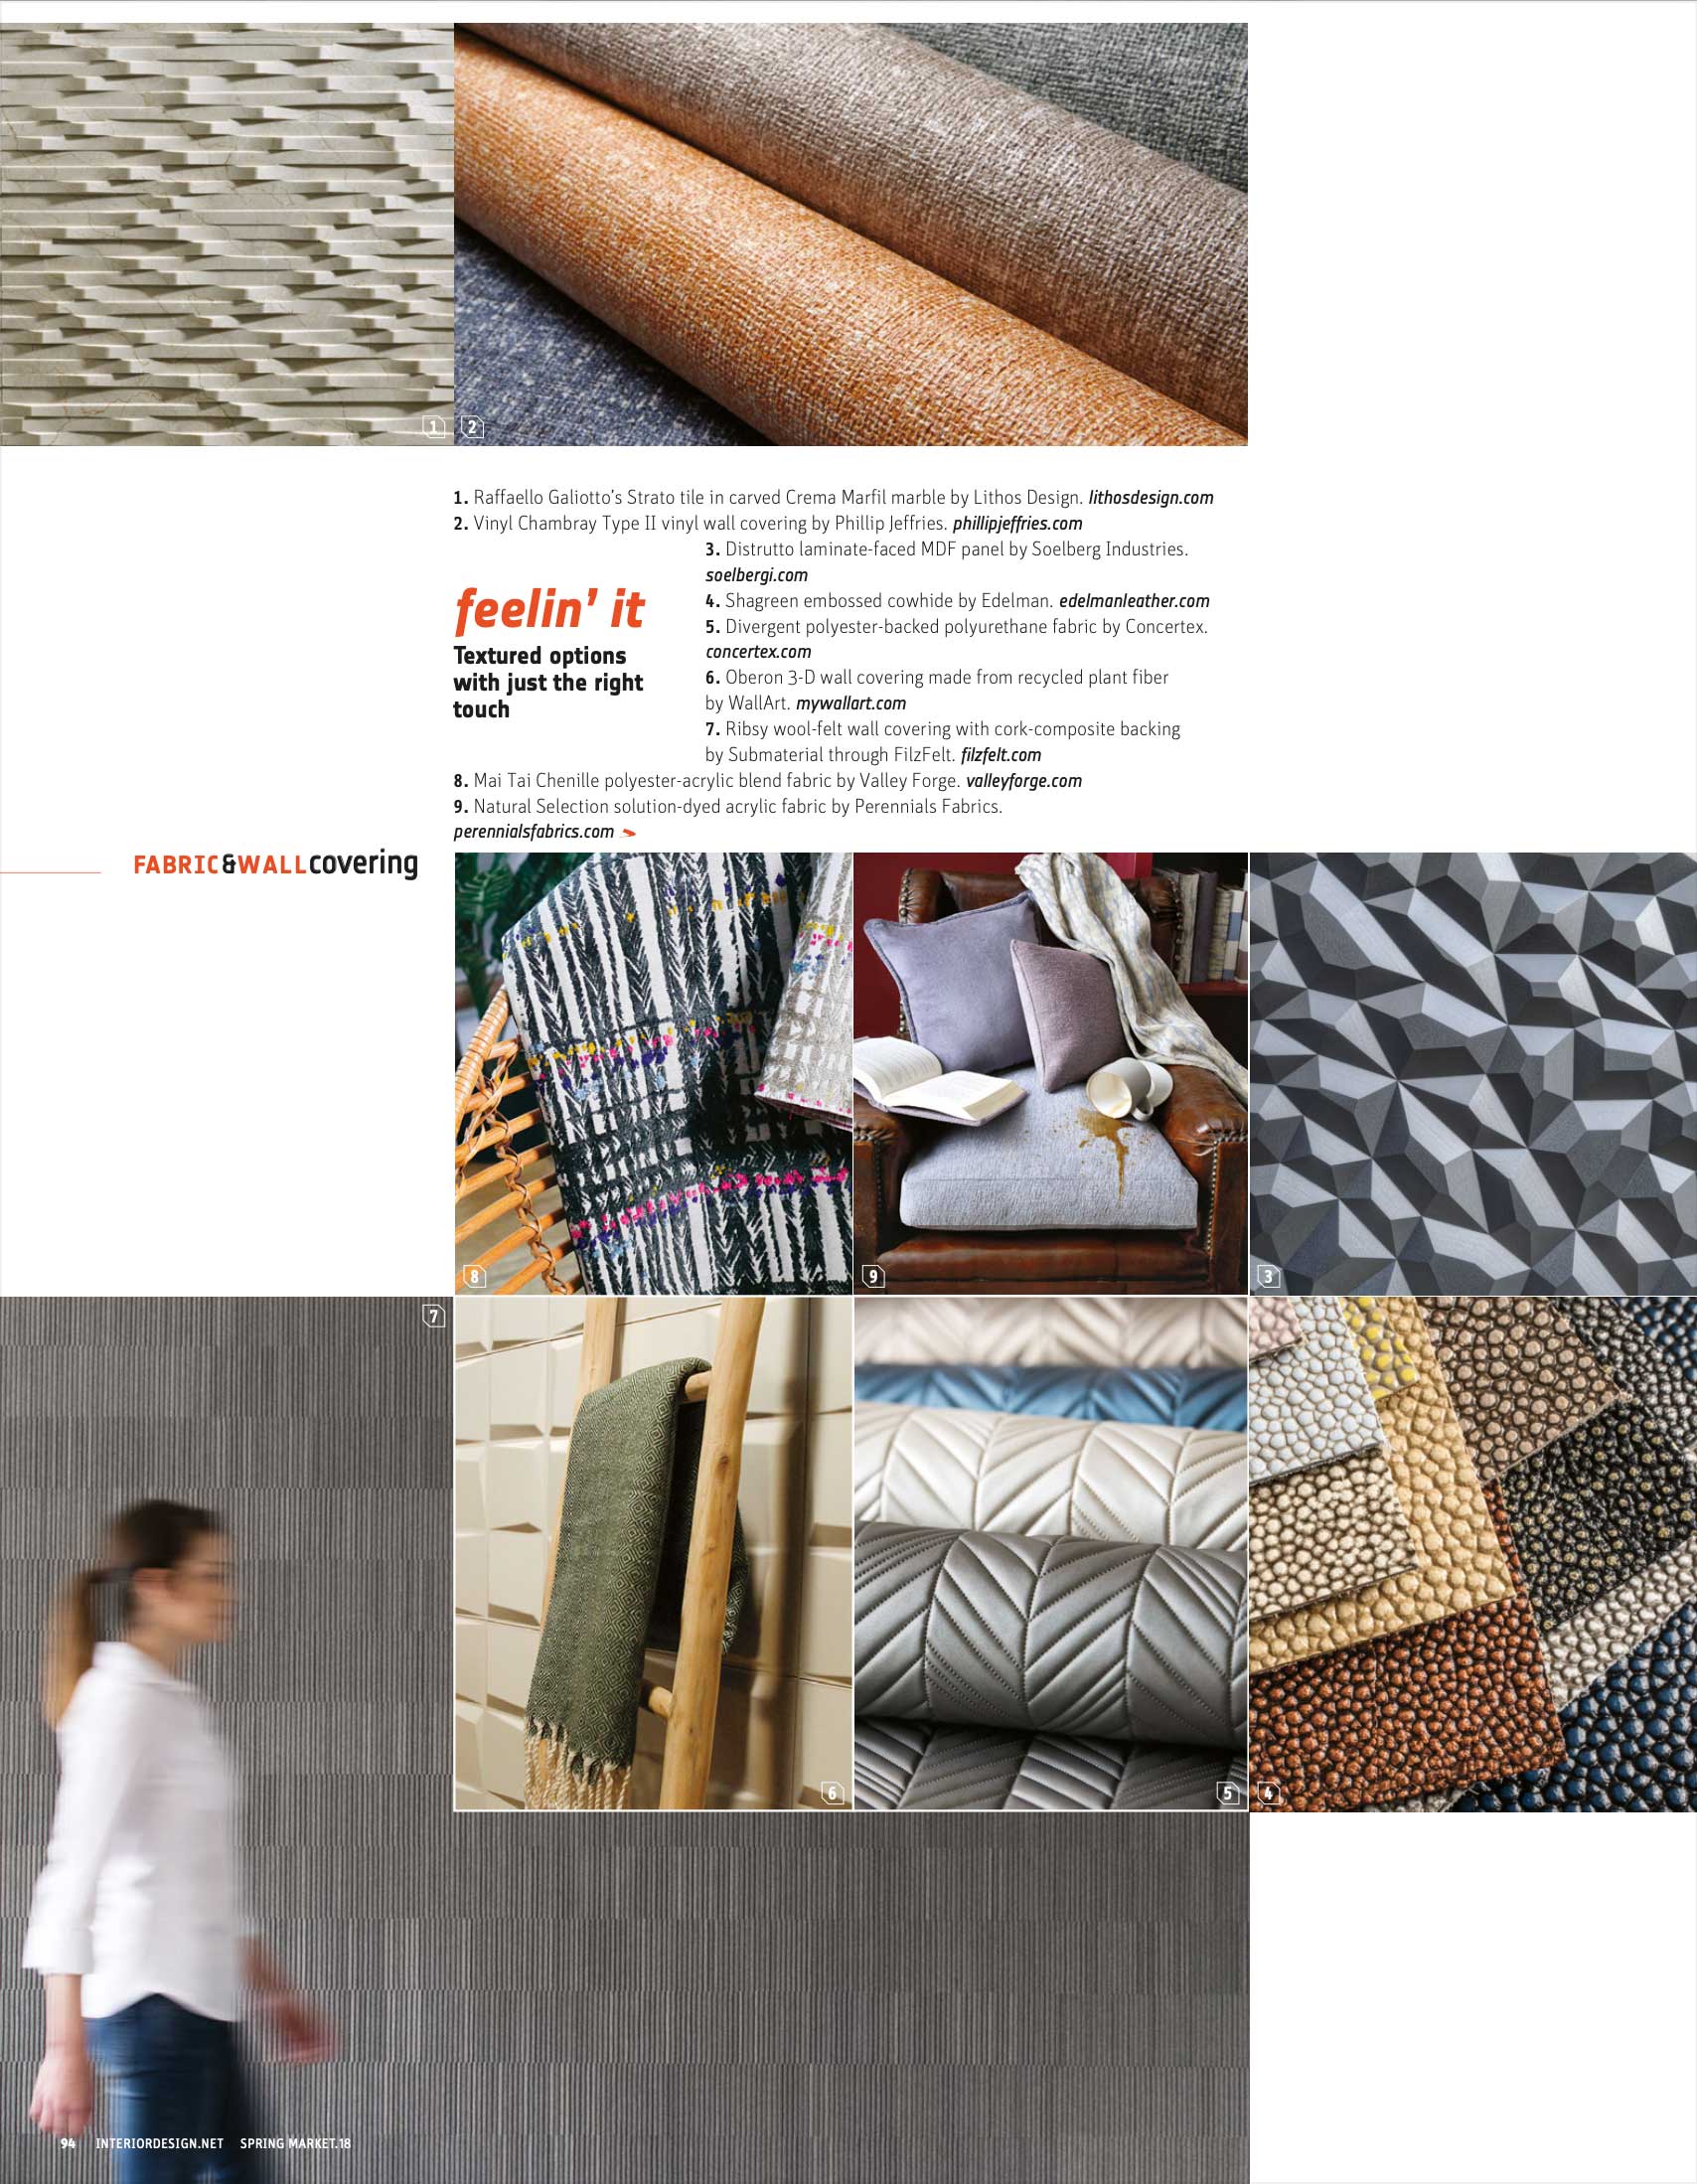 Submaterial gray wall covering in on a page in Interior Design Spring Market Tabloid 2018